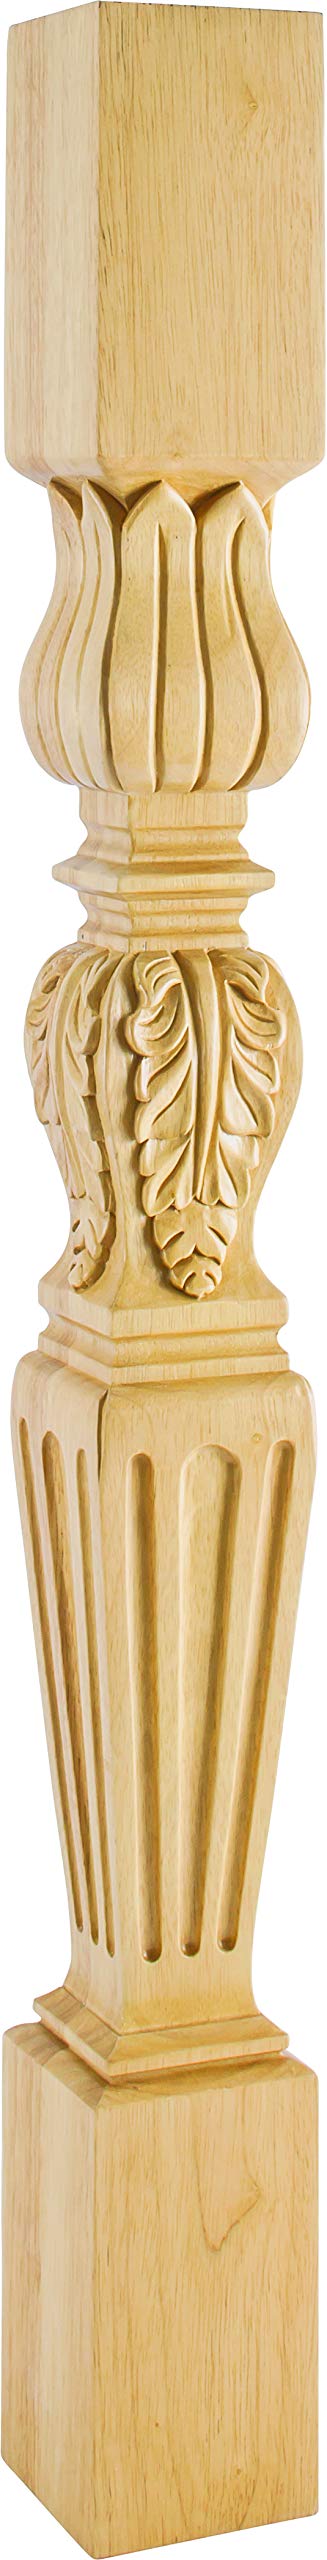 Hardware Resources P27-5-42-WB 5" W x 5" D x 42" H White Birch Fluted Post